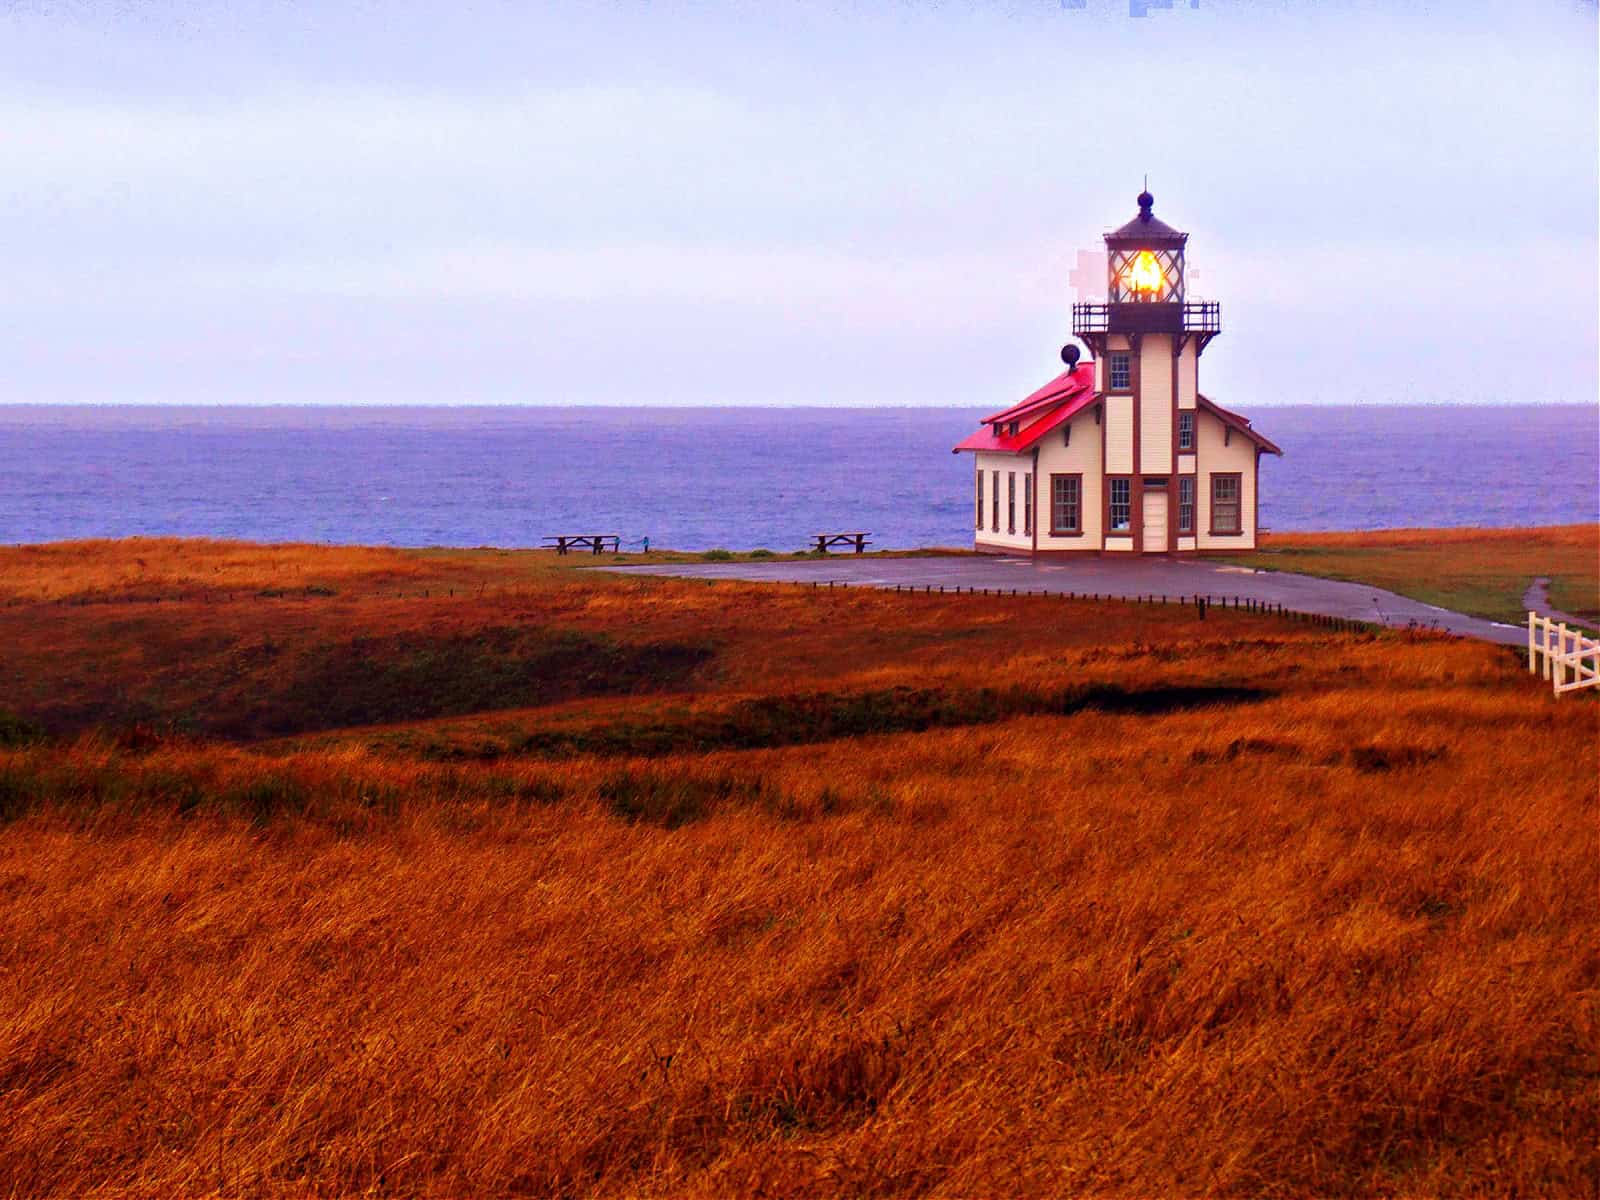 The Cabrillo Point Lighthouse in Mendocino